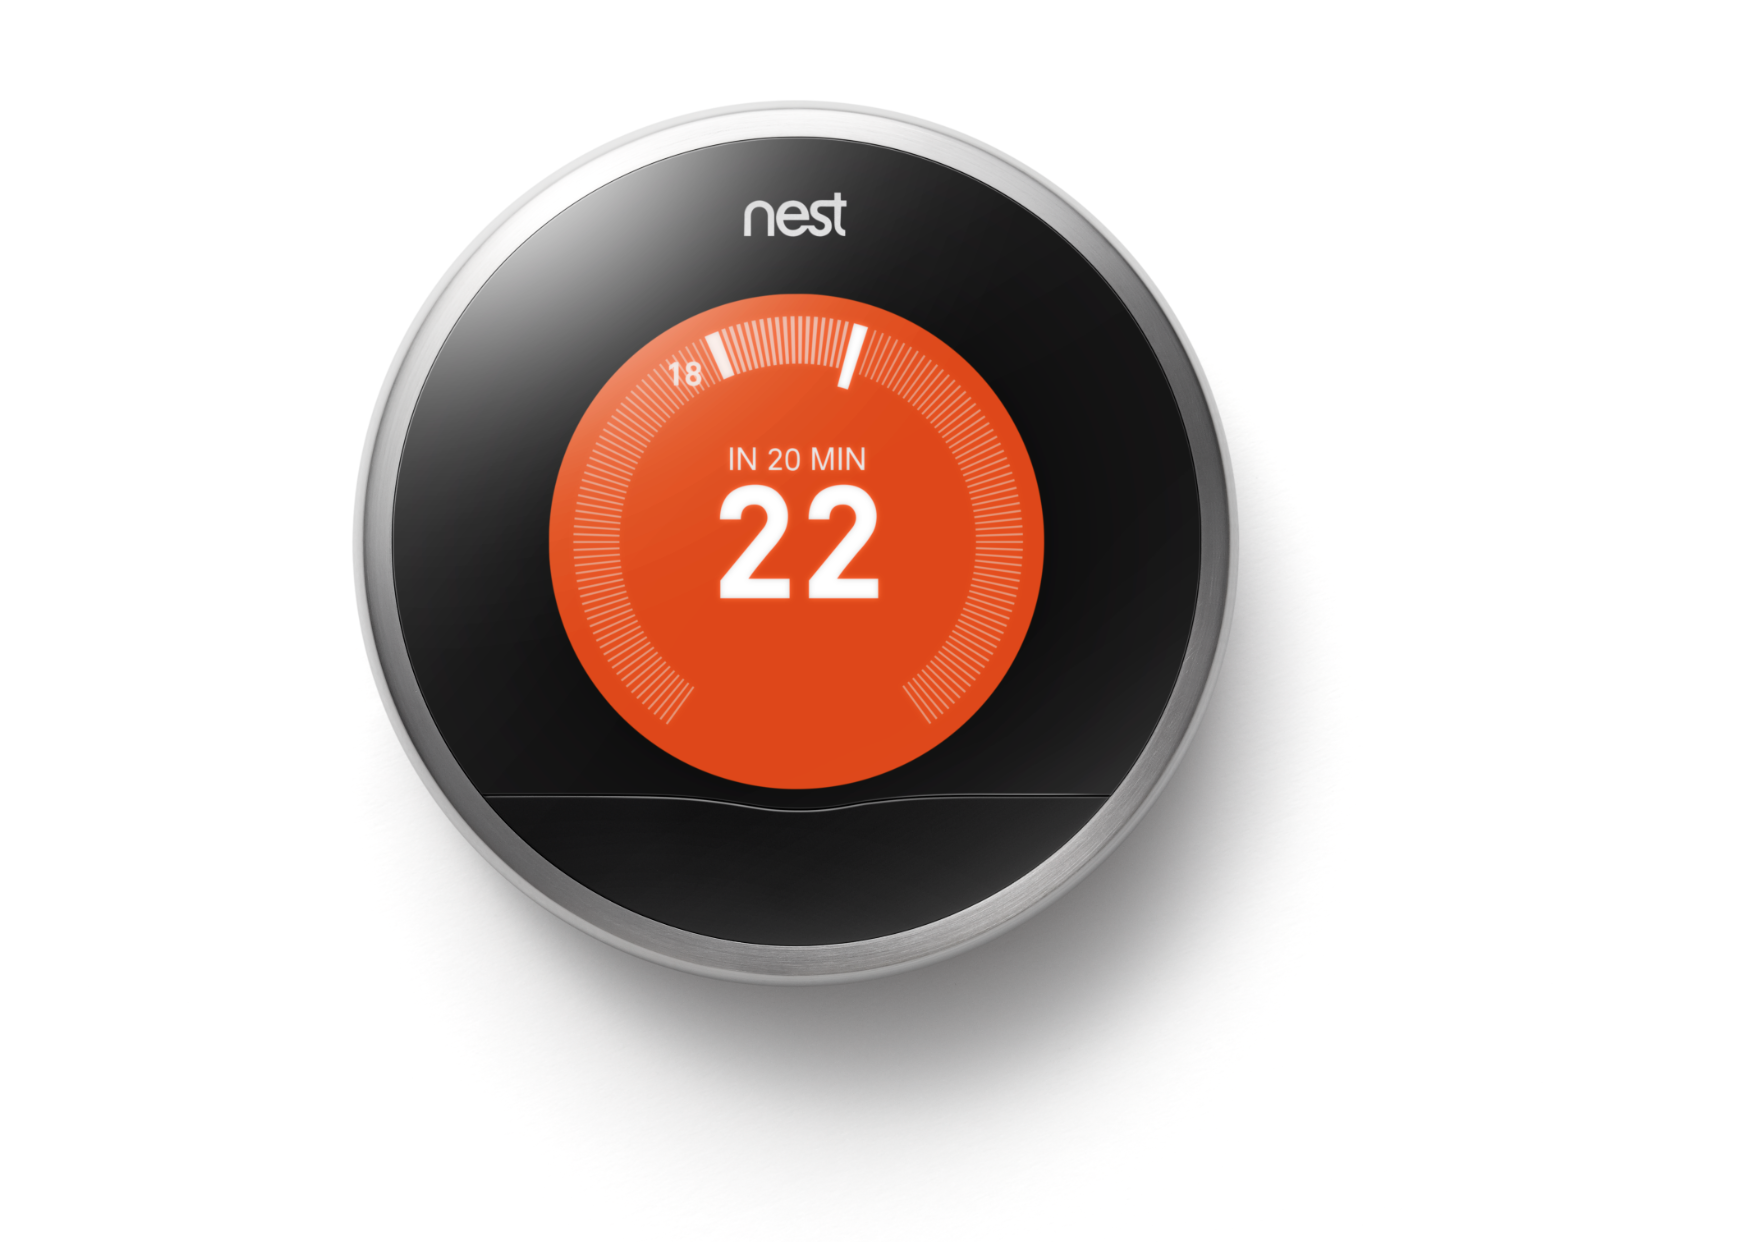 Google Nest thermostats to have HVAC fault notification